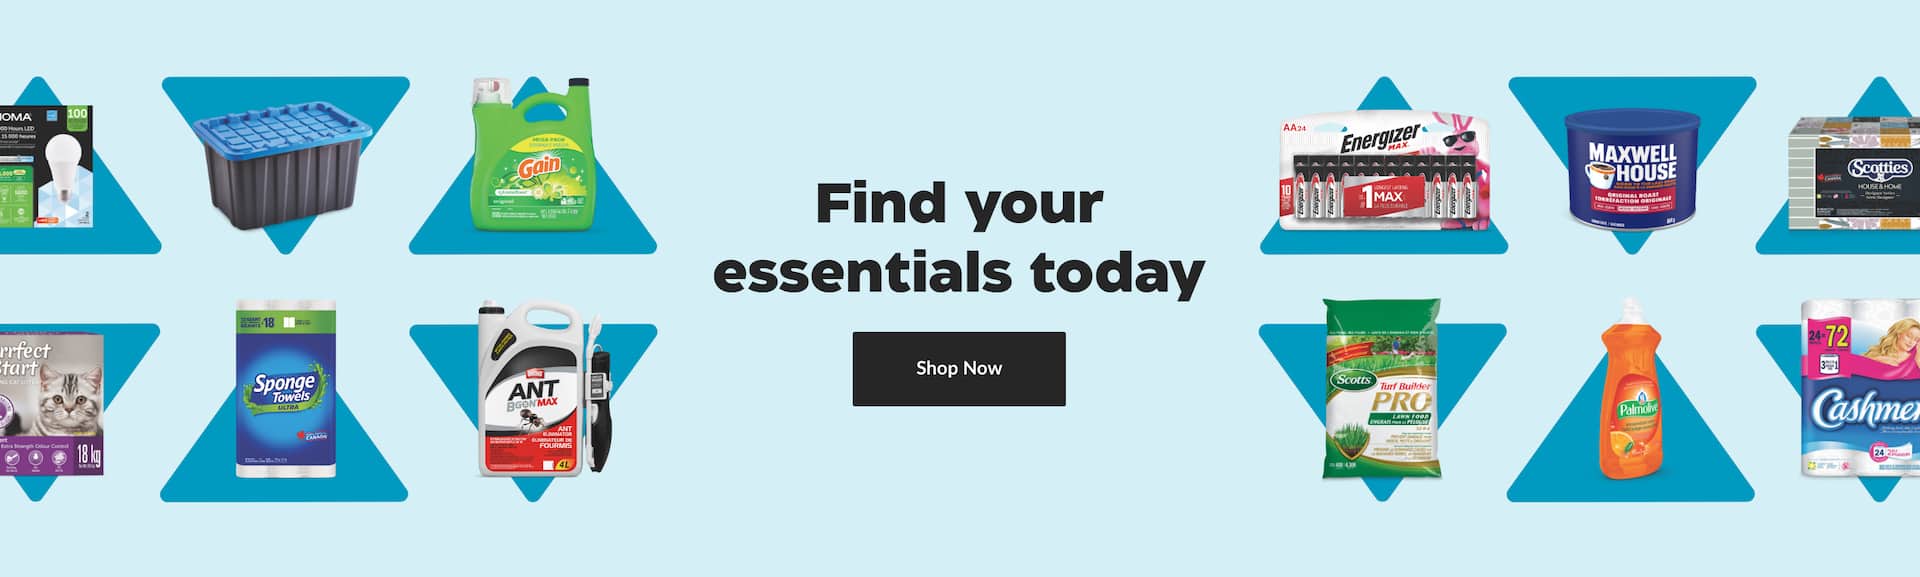 Various household products including Energizer batteries, Gain liquid laundry detergent and more around a “Find your essentials today” title.